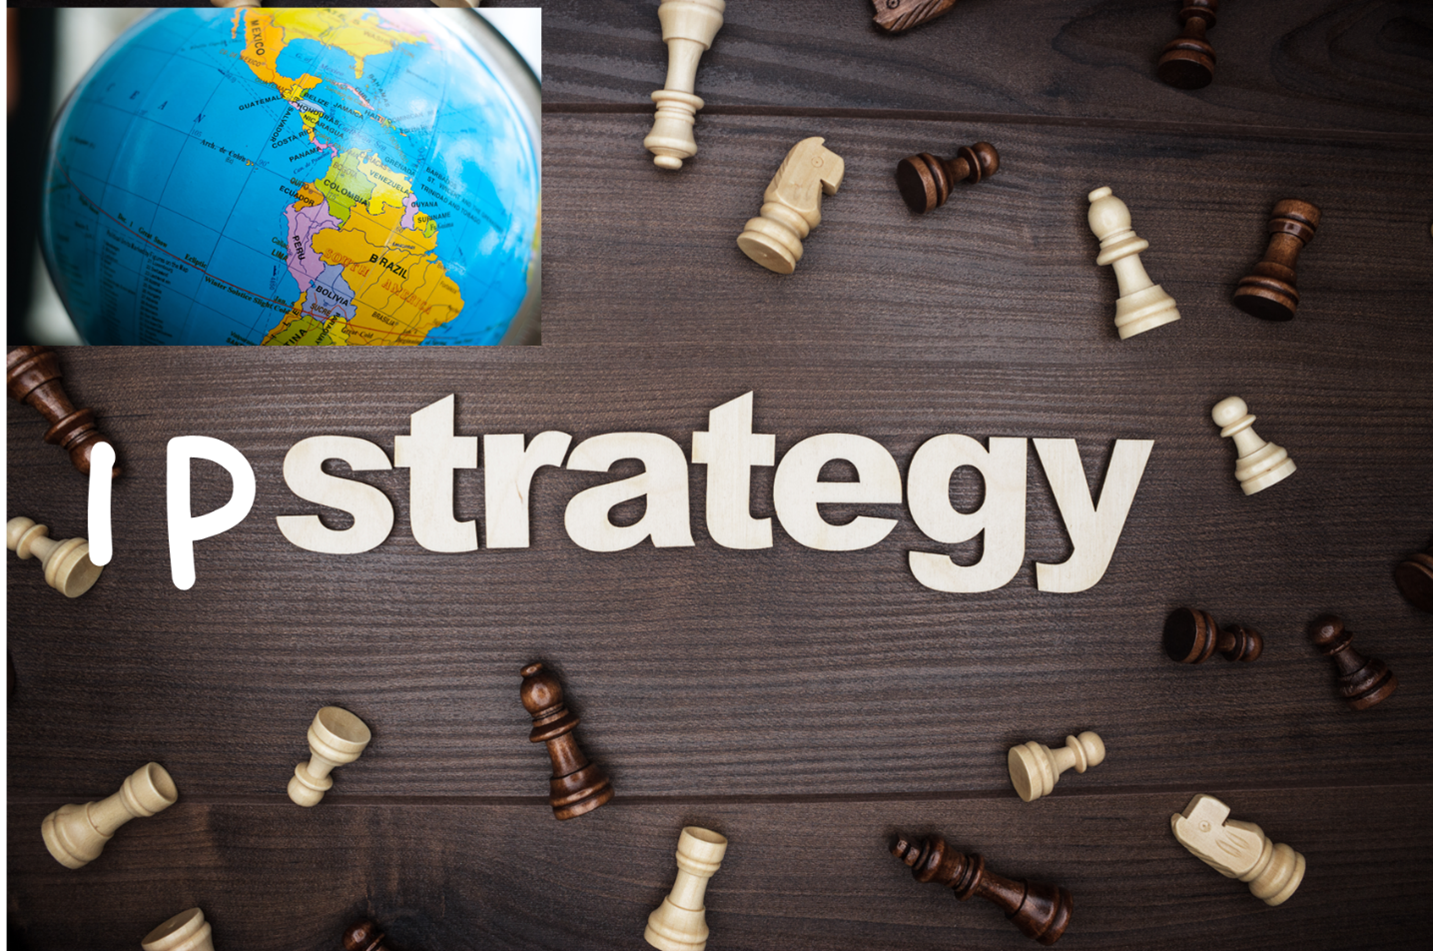 IP Strategy text, chess pieces, globe